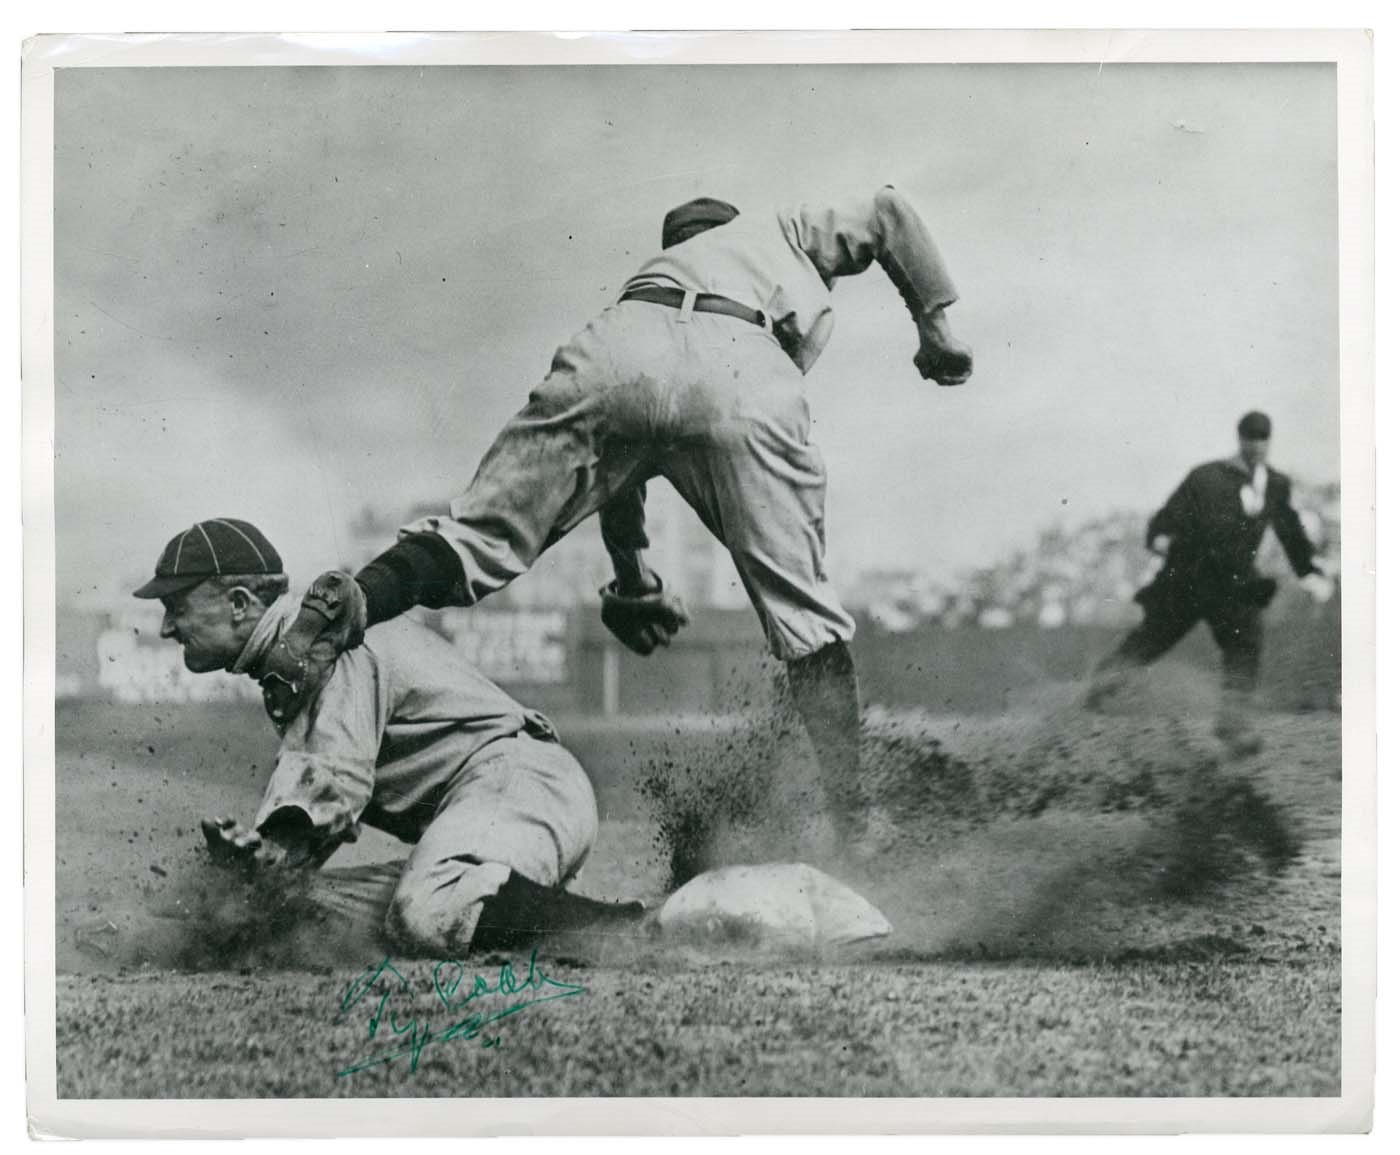 - The Holy Grail of Signed Photographs - Ty Cobb "Sliding Into Third" by Charles Conlon (PSA & JSA)